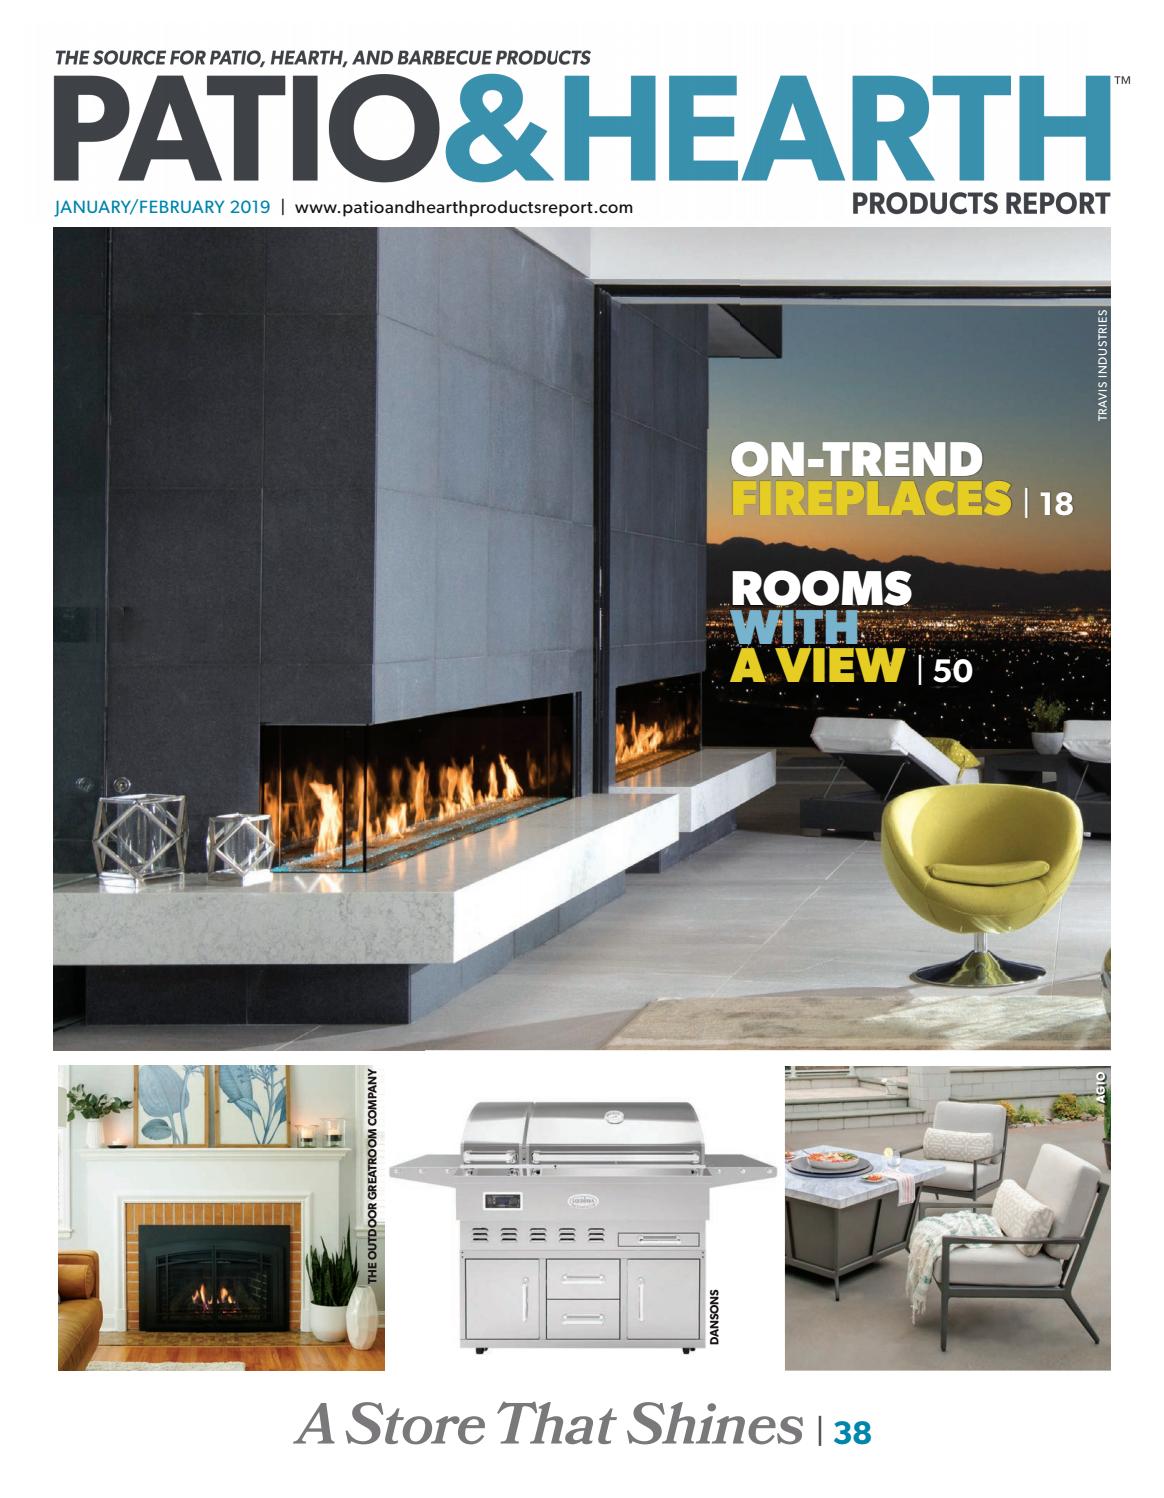 Montigo Fireplace Parts Inspirational Patio & Hearth Products Report January February 2019 by